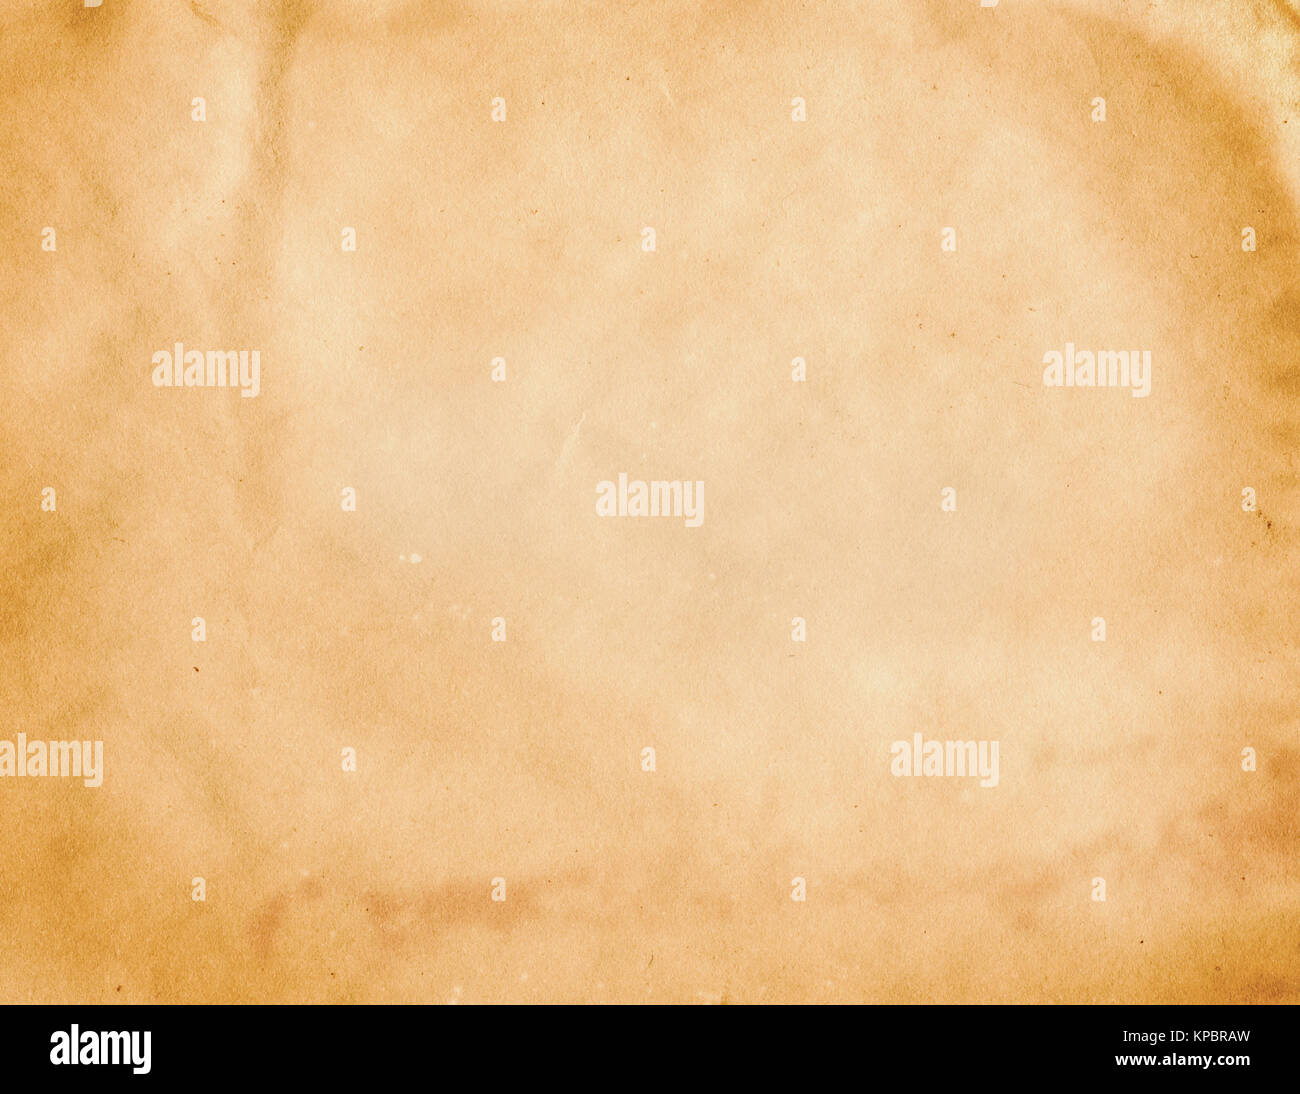 Old grunge paper background.Natural old paper texture for the design. Stock Photo